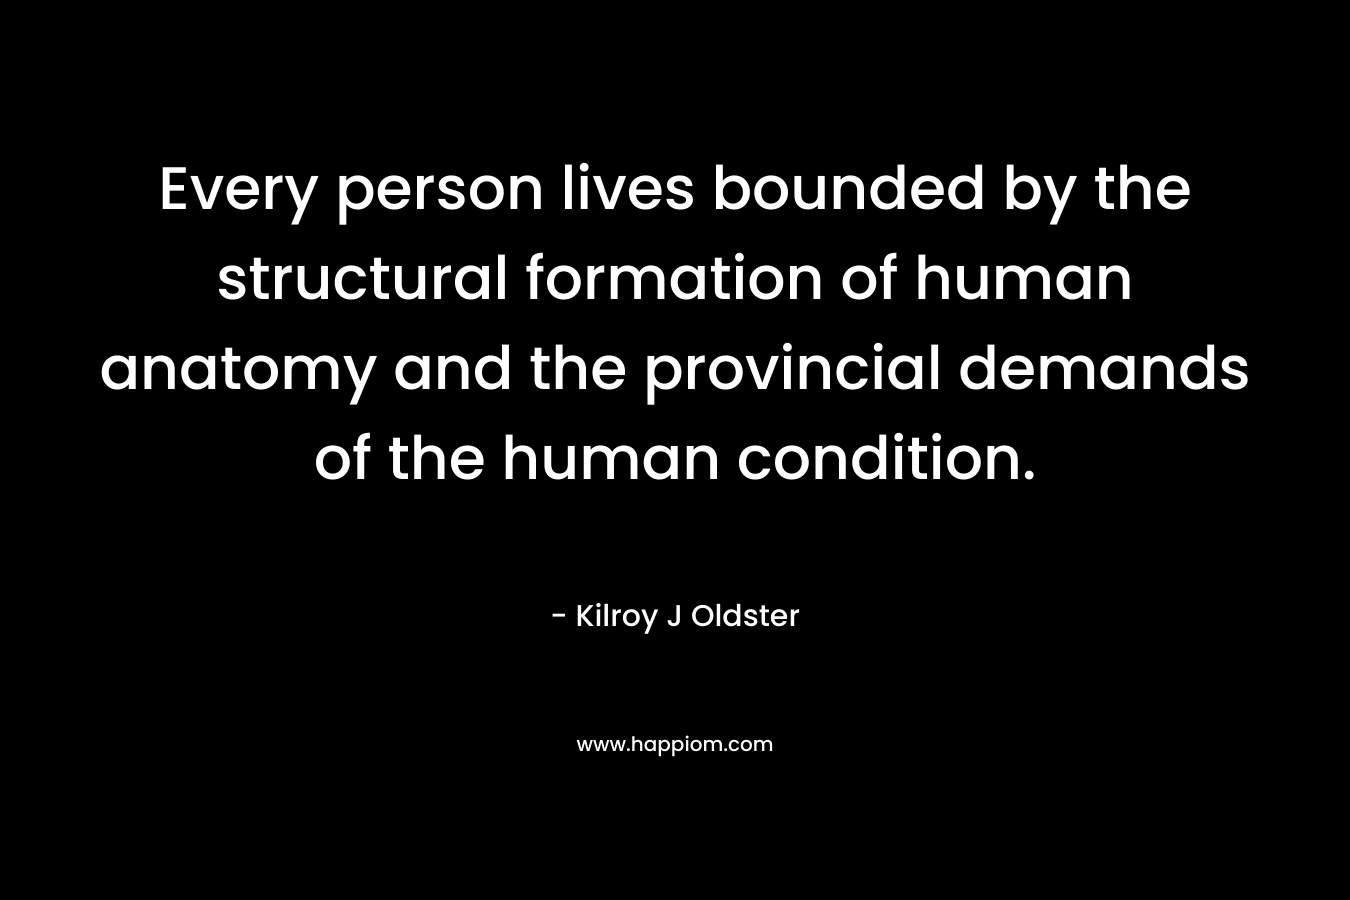 Every person lives bounded by the structural formation of human anatomy and the provincial demands of the human condition.